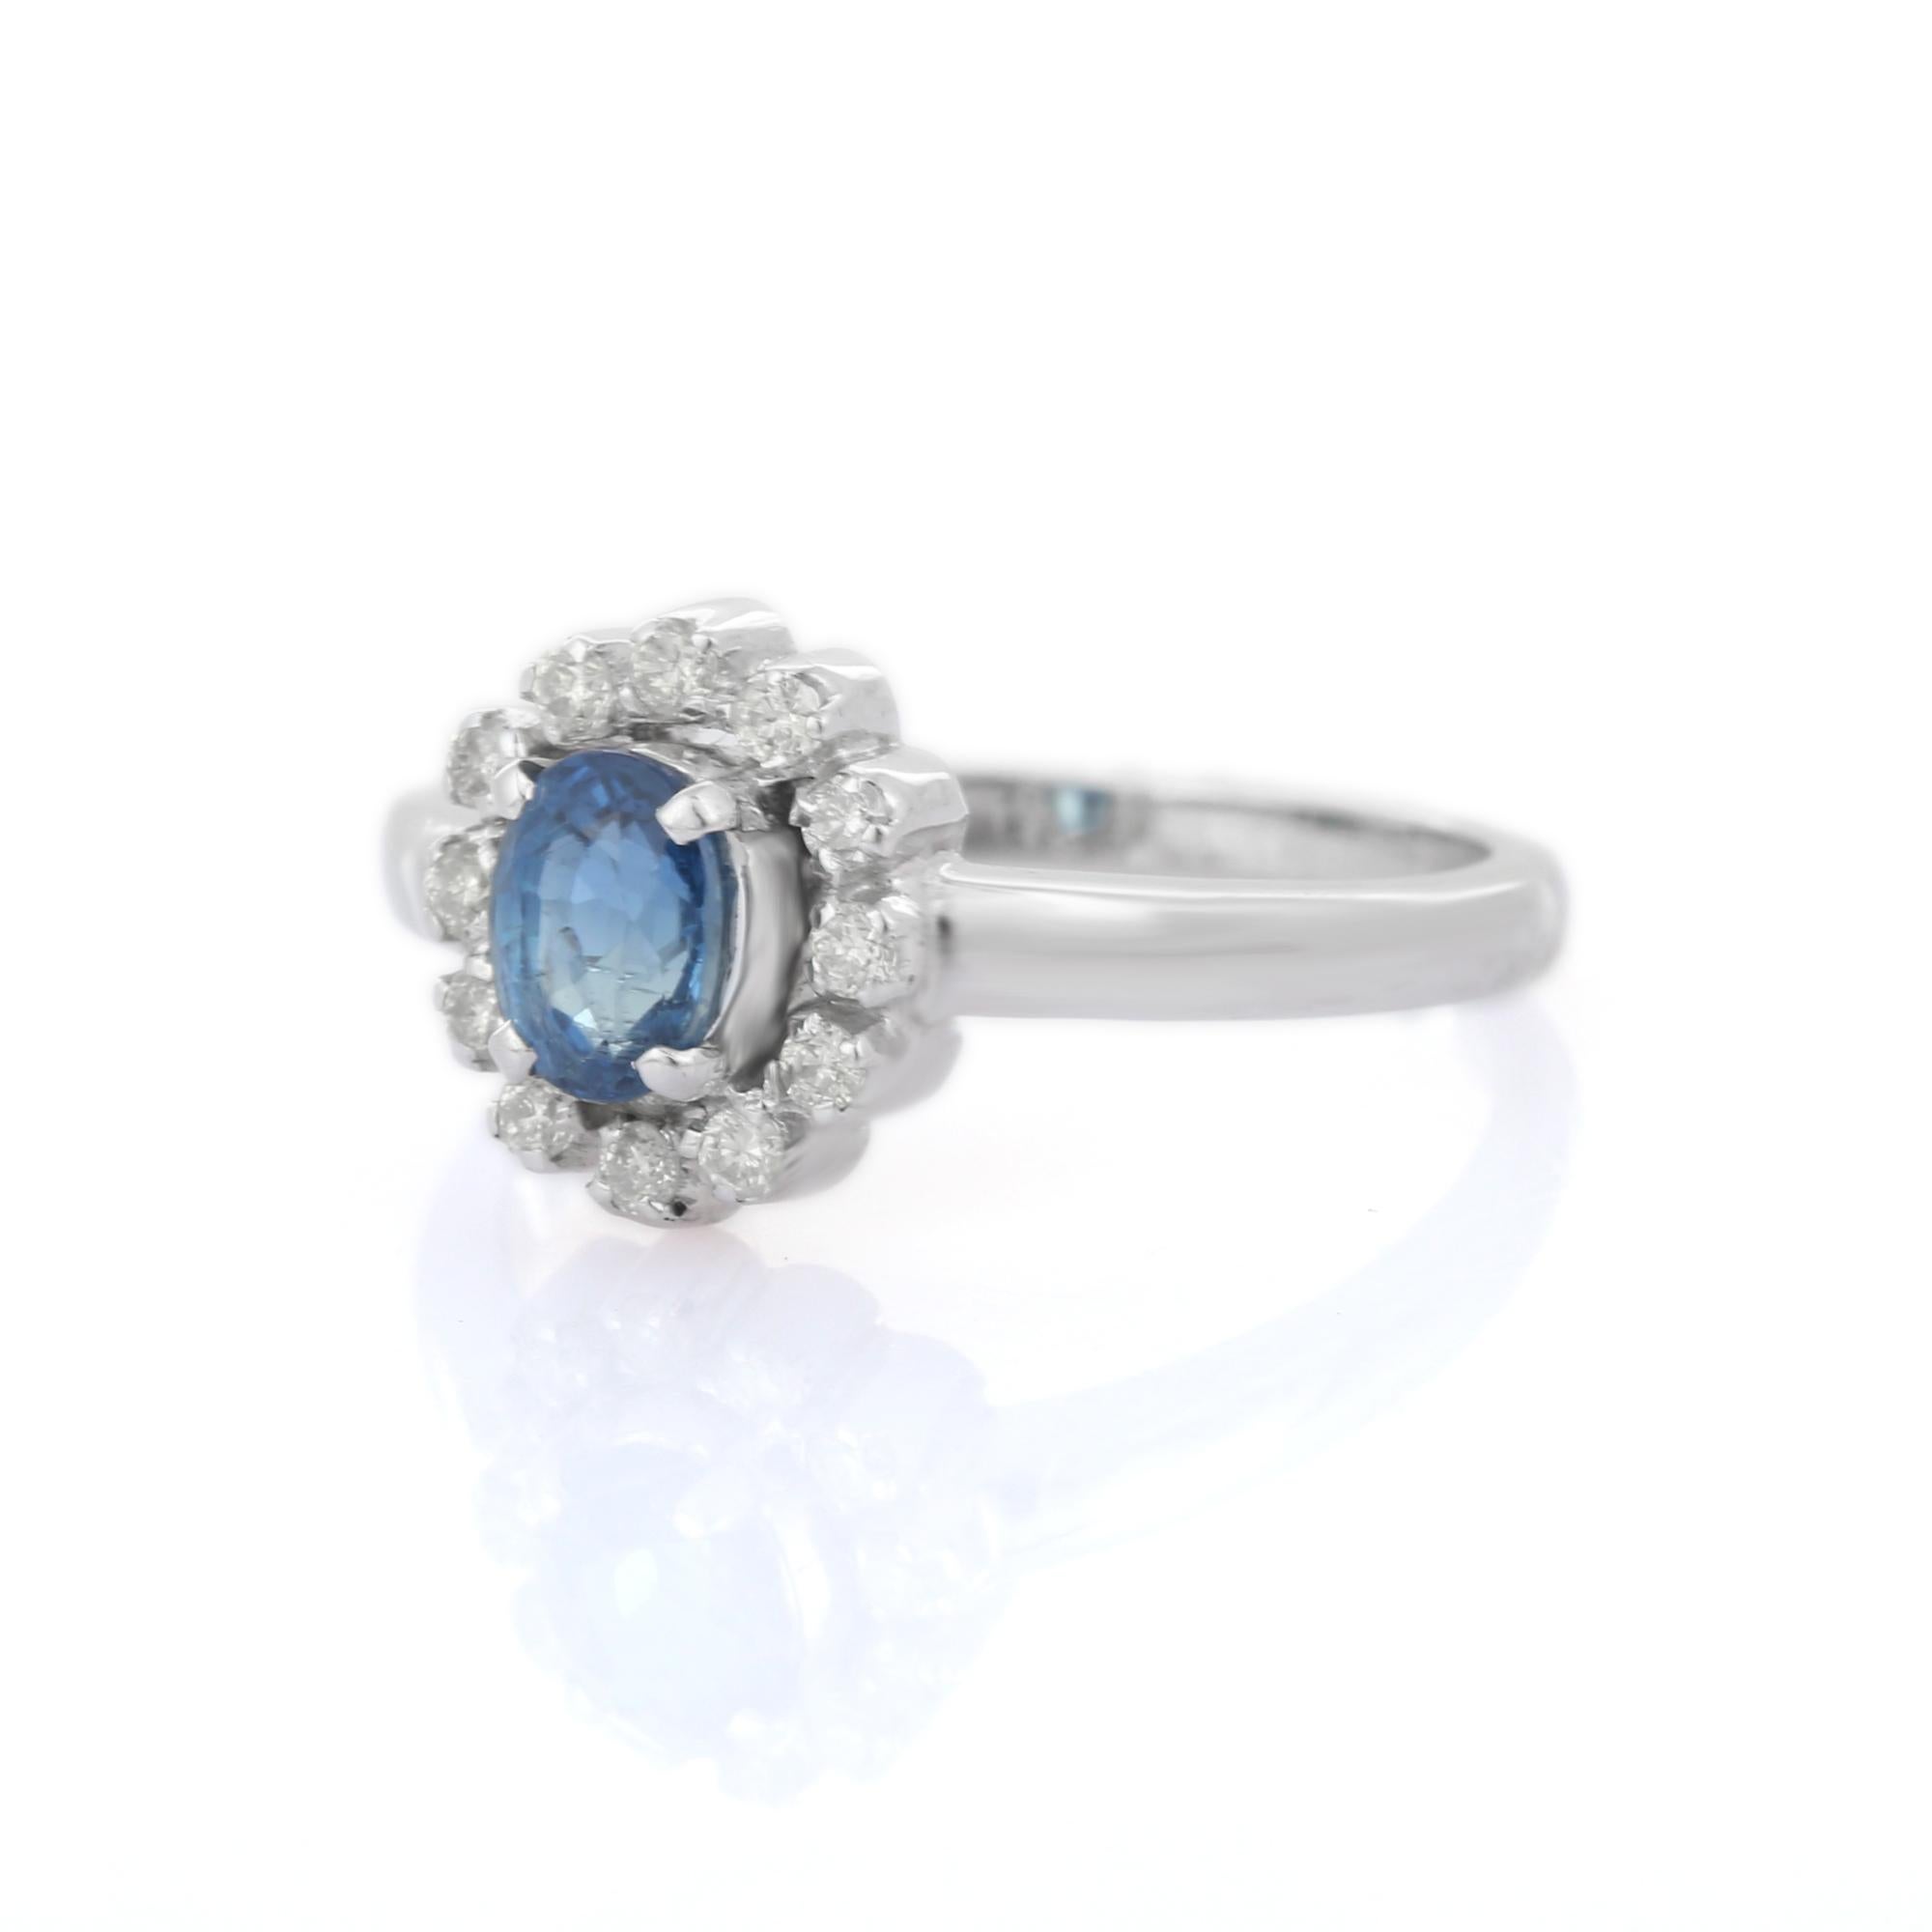 For Sale:  14K White Gold Halo Diamond and Sapphire Ring, Sapphire Diamond Halo Ring 3